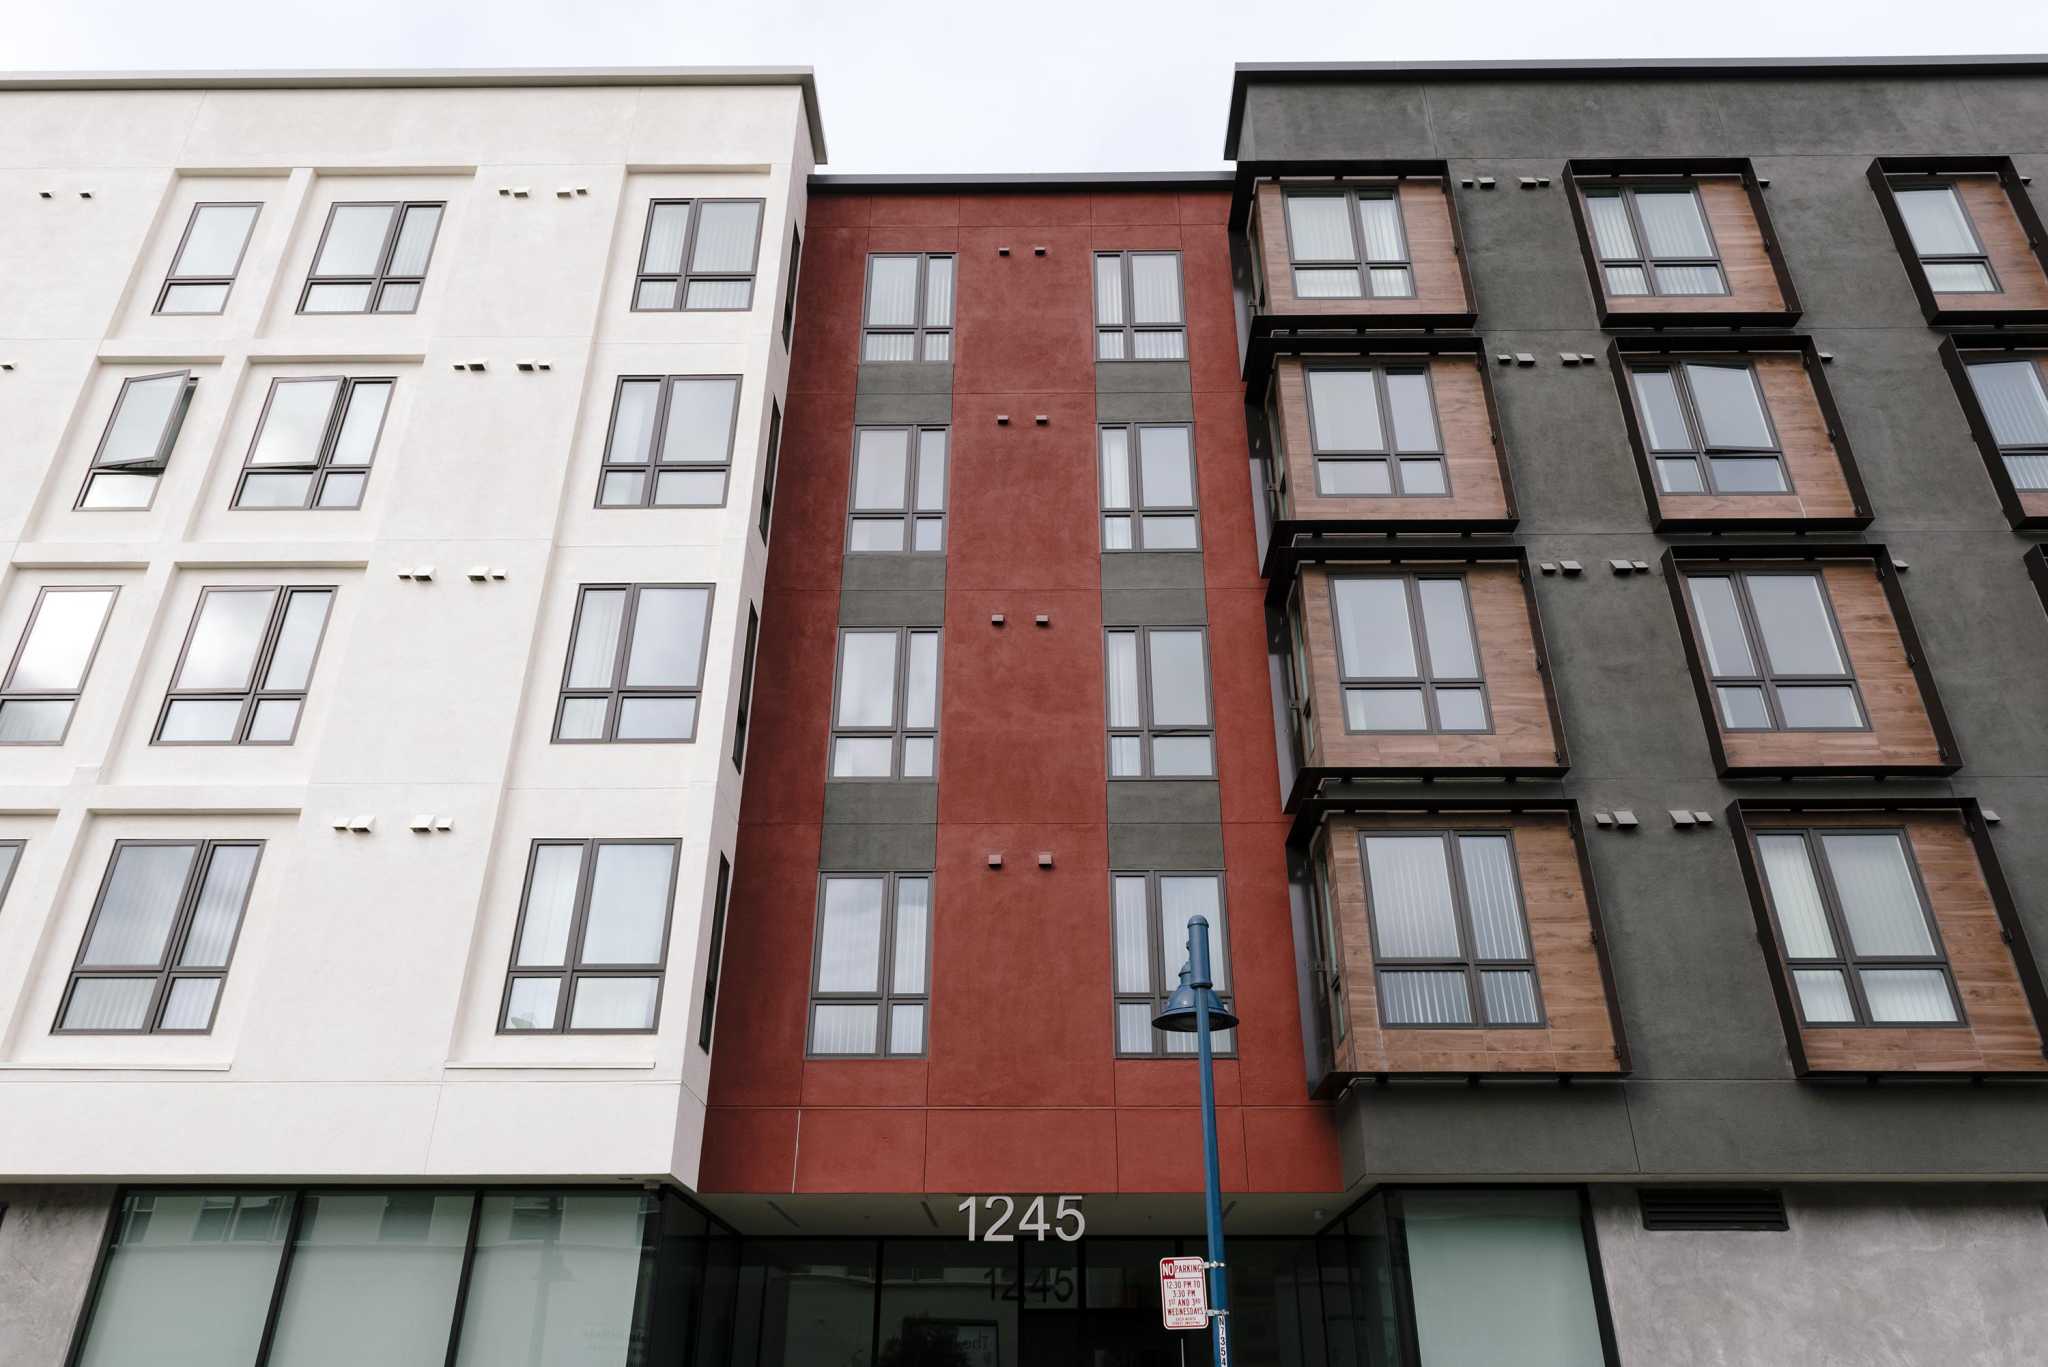 Oakland could create a new tax district to fund affordable housing. Here's what that means